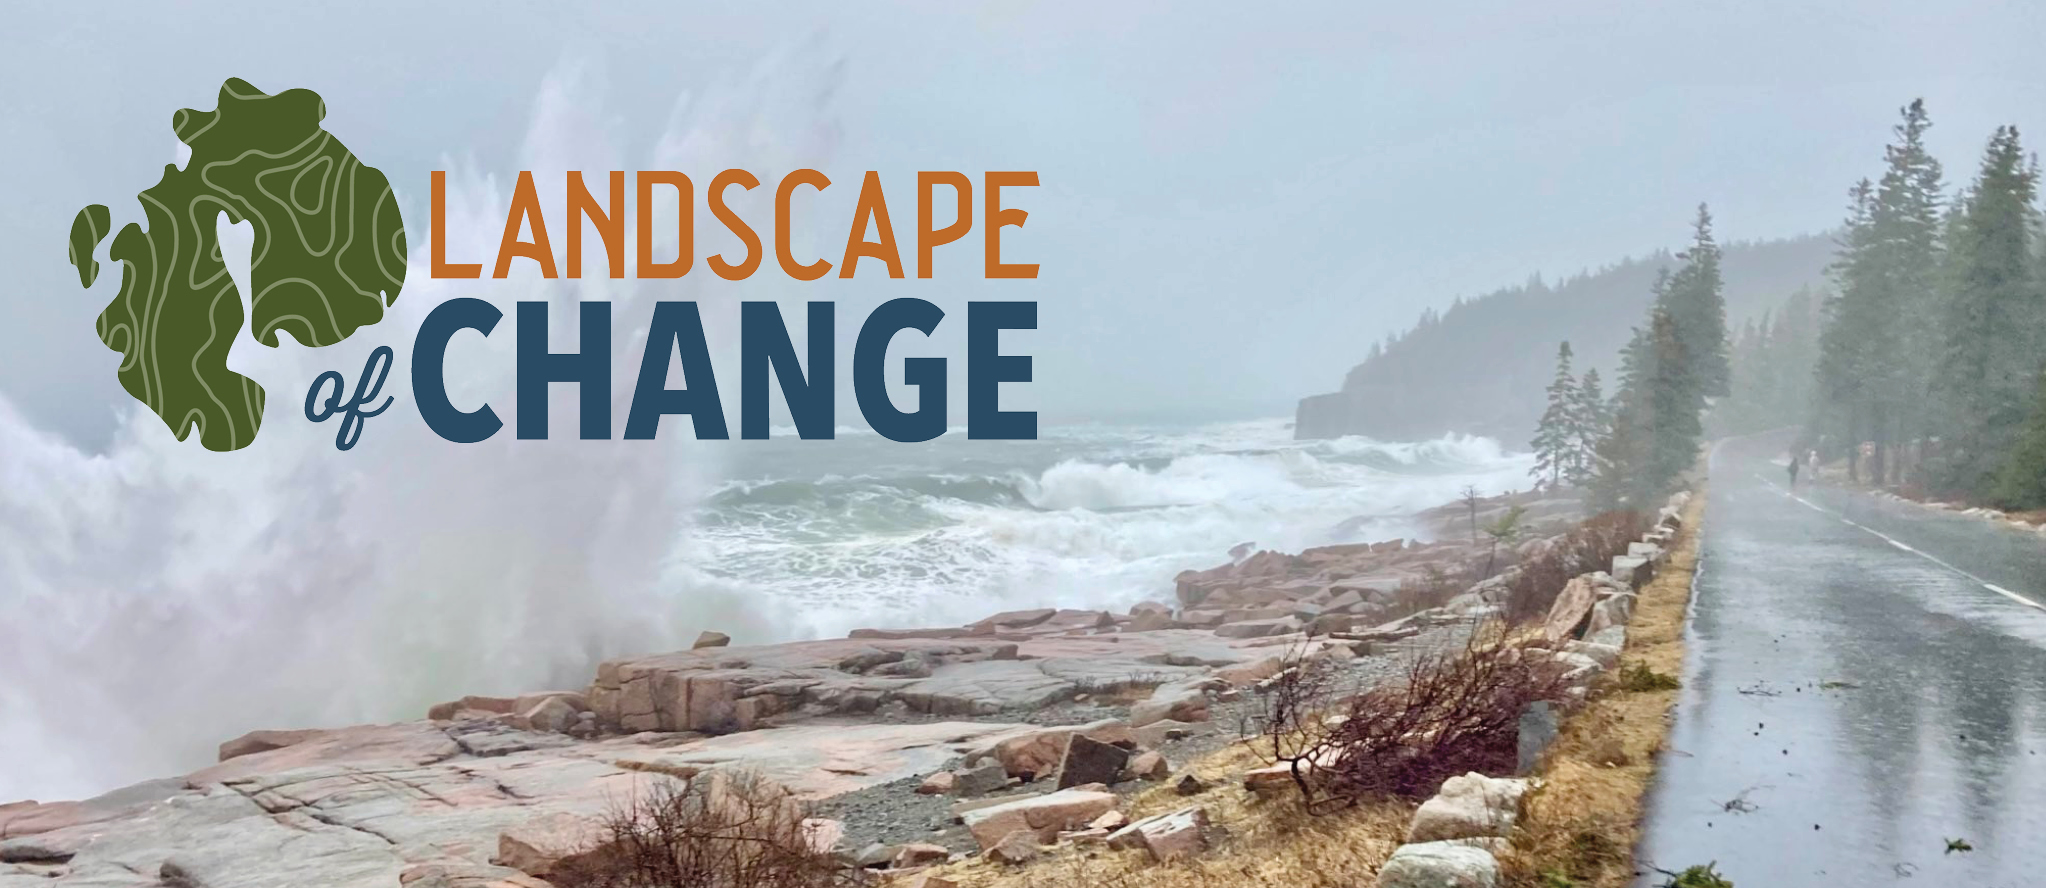 View of the Park Loop Road in Acadia National Park during an intense coastal storm, with waves crashing against the shoreline. Overlaid is the Landscape of Change logo in full color.